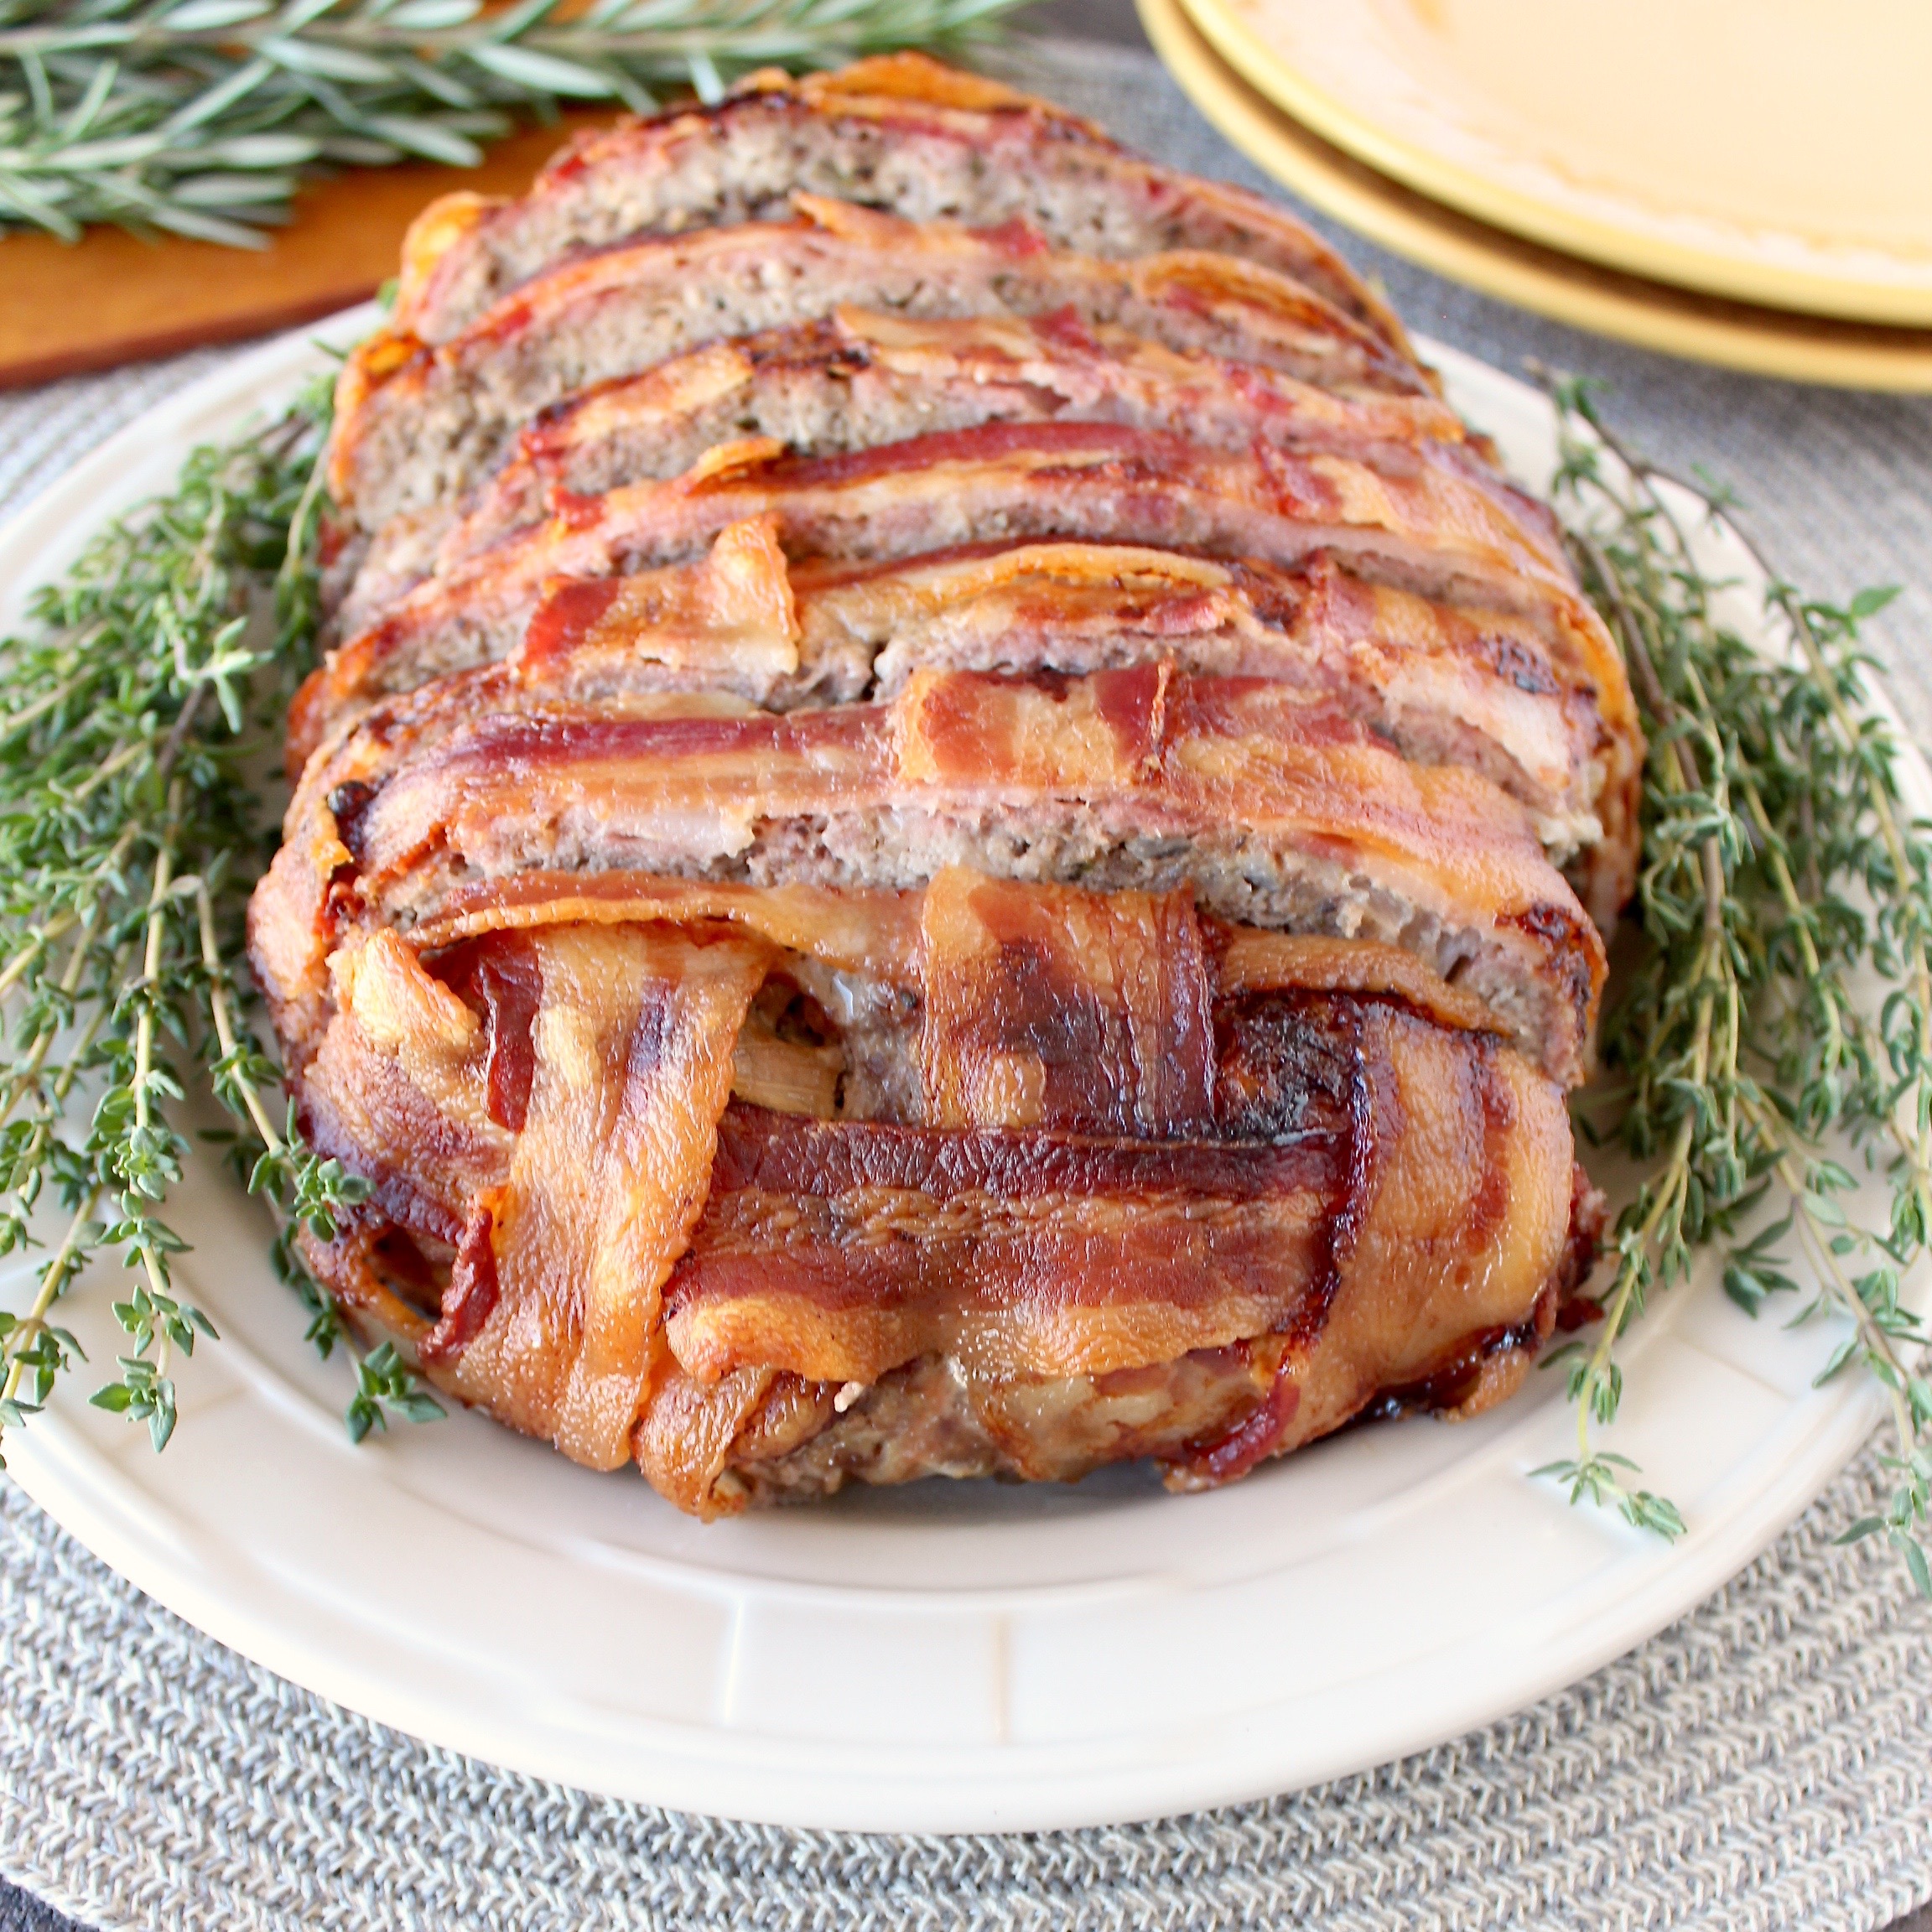 Bacon Wrapped Meatloaf Recipe - WhitneyBond.com